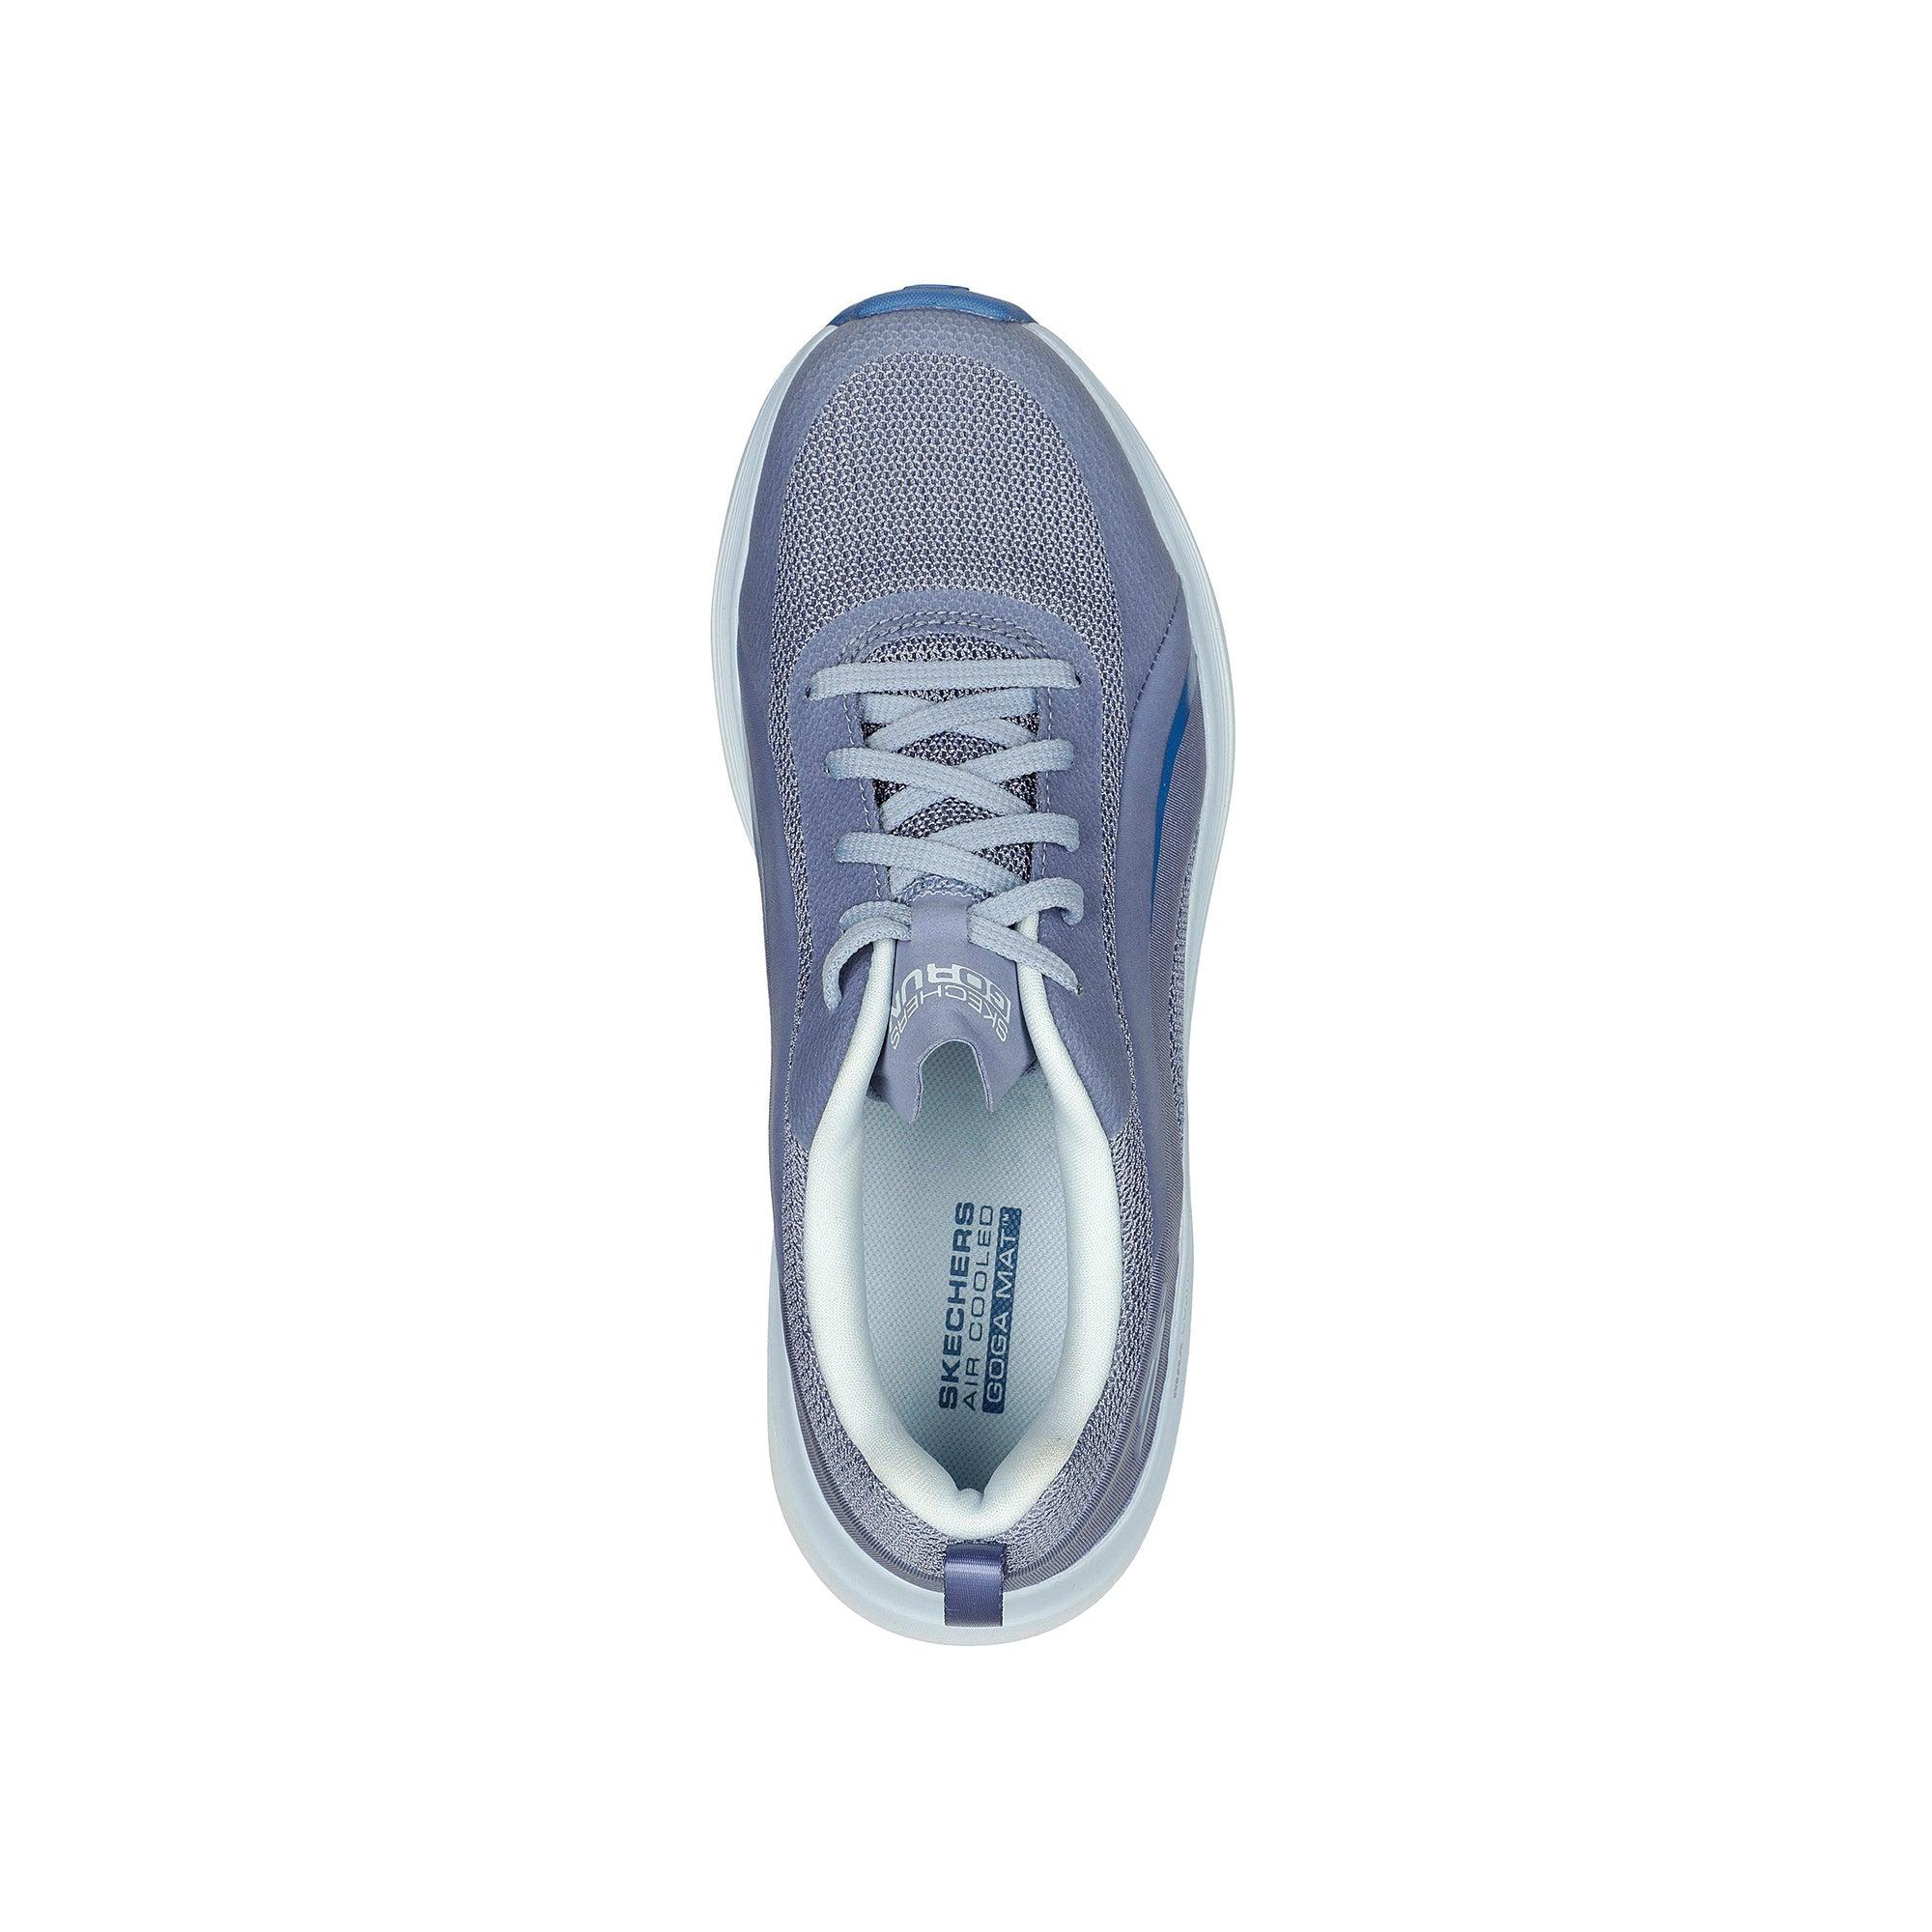 Giày thể thao nữ Skechers Max Cushioning Delta - 129121